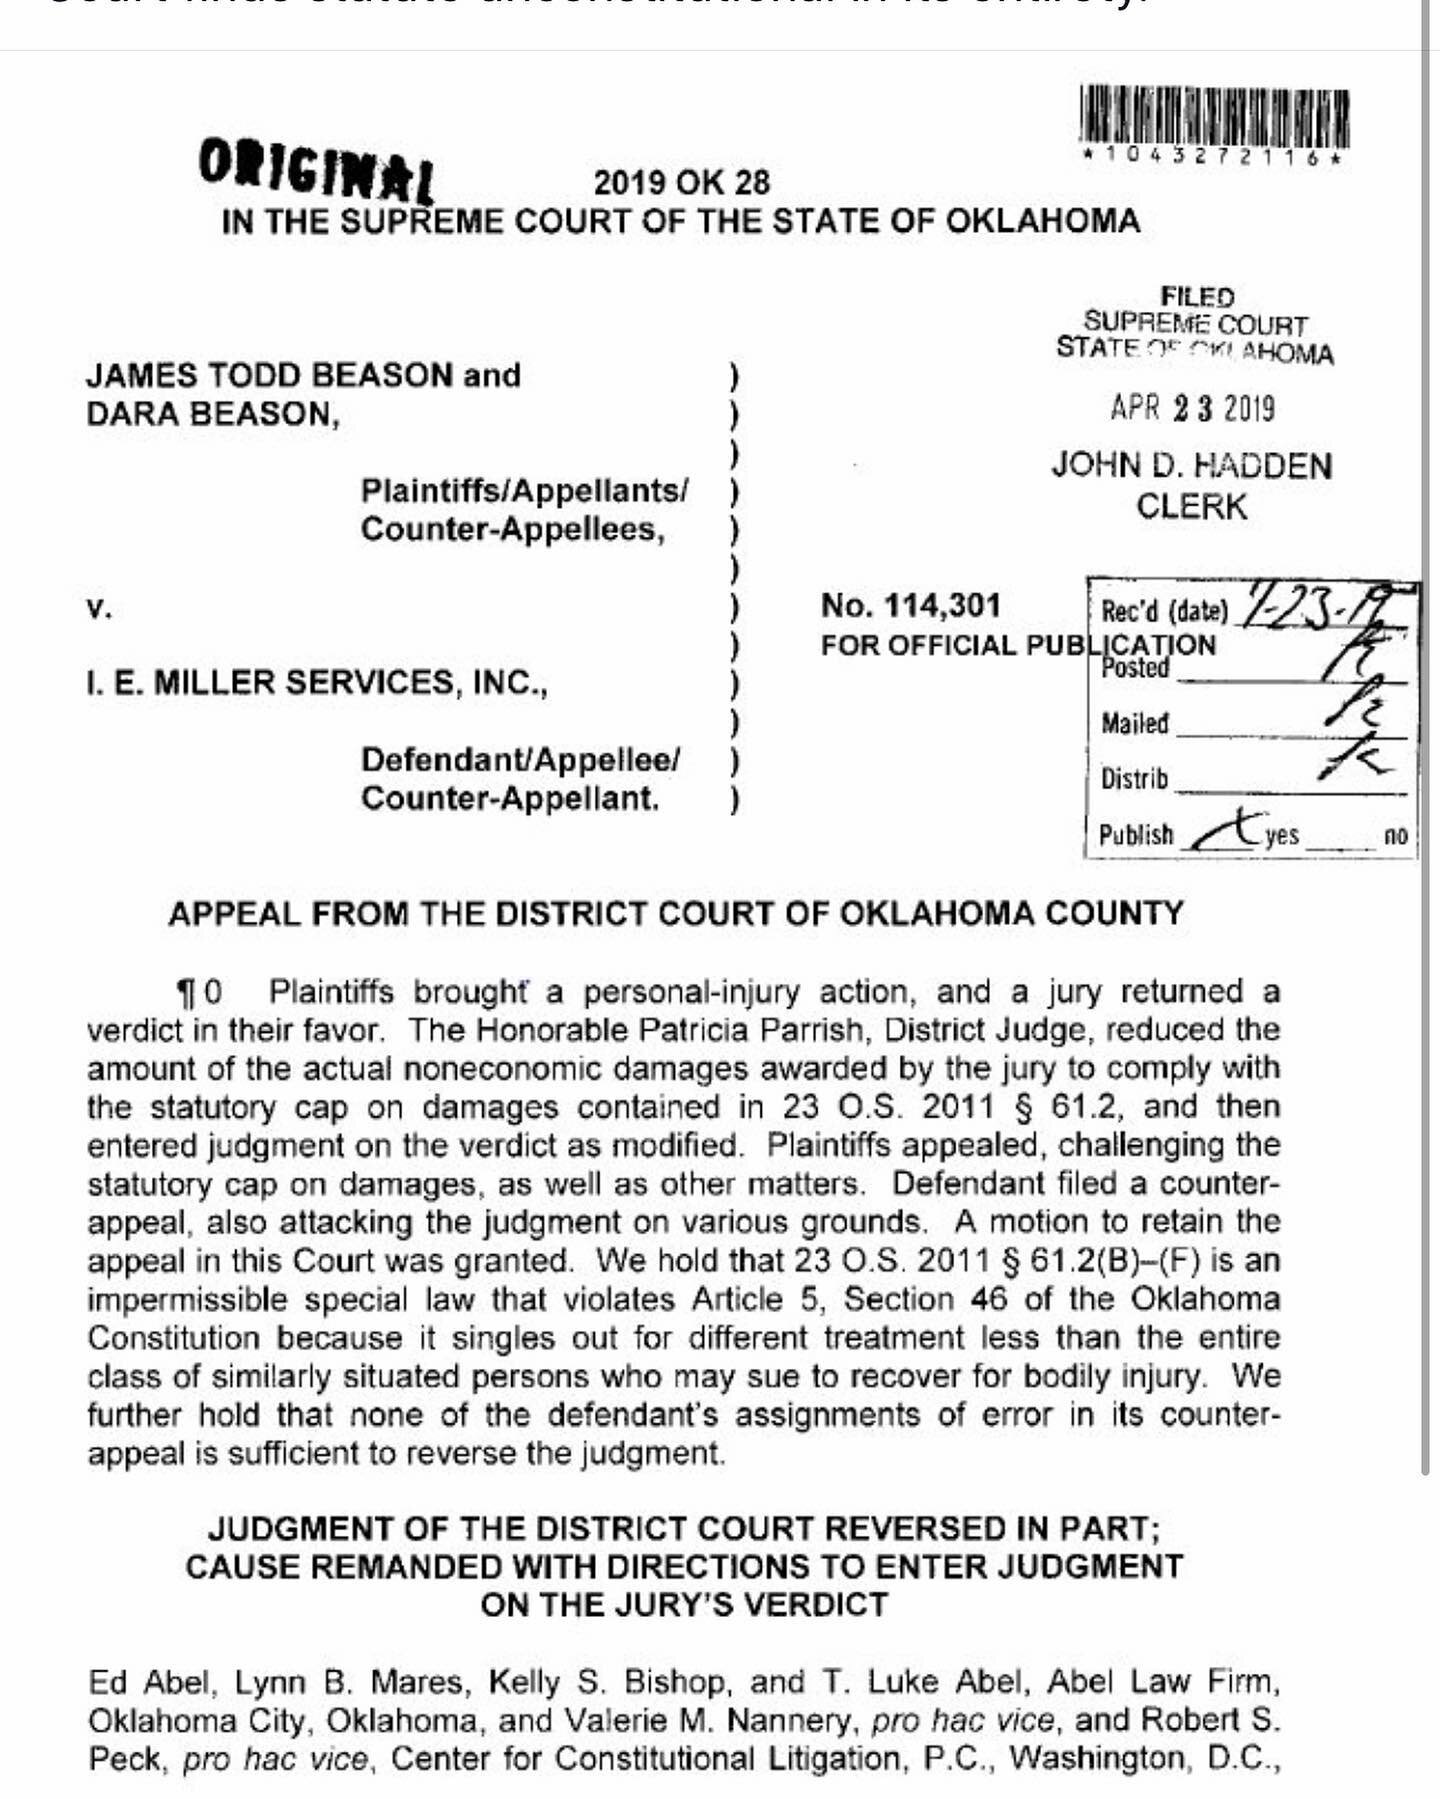 BREAKING NEWS!! 04/23/2019:  Oklahoma Supreme Court strikes down 23 O.S. sec. 61.2(B-F) which statutorily limits a Plaintiff's cap on recovery of non-economic damages to $350,000.00.  Court finds statute unconstitutional in its entirety.